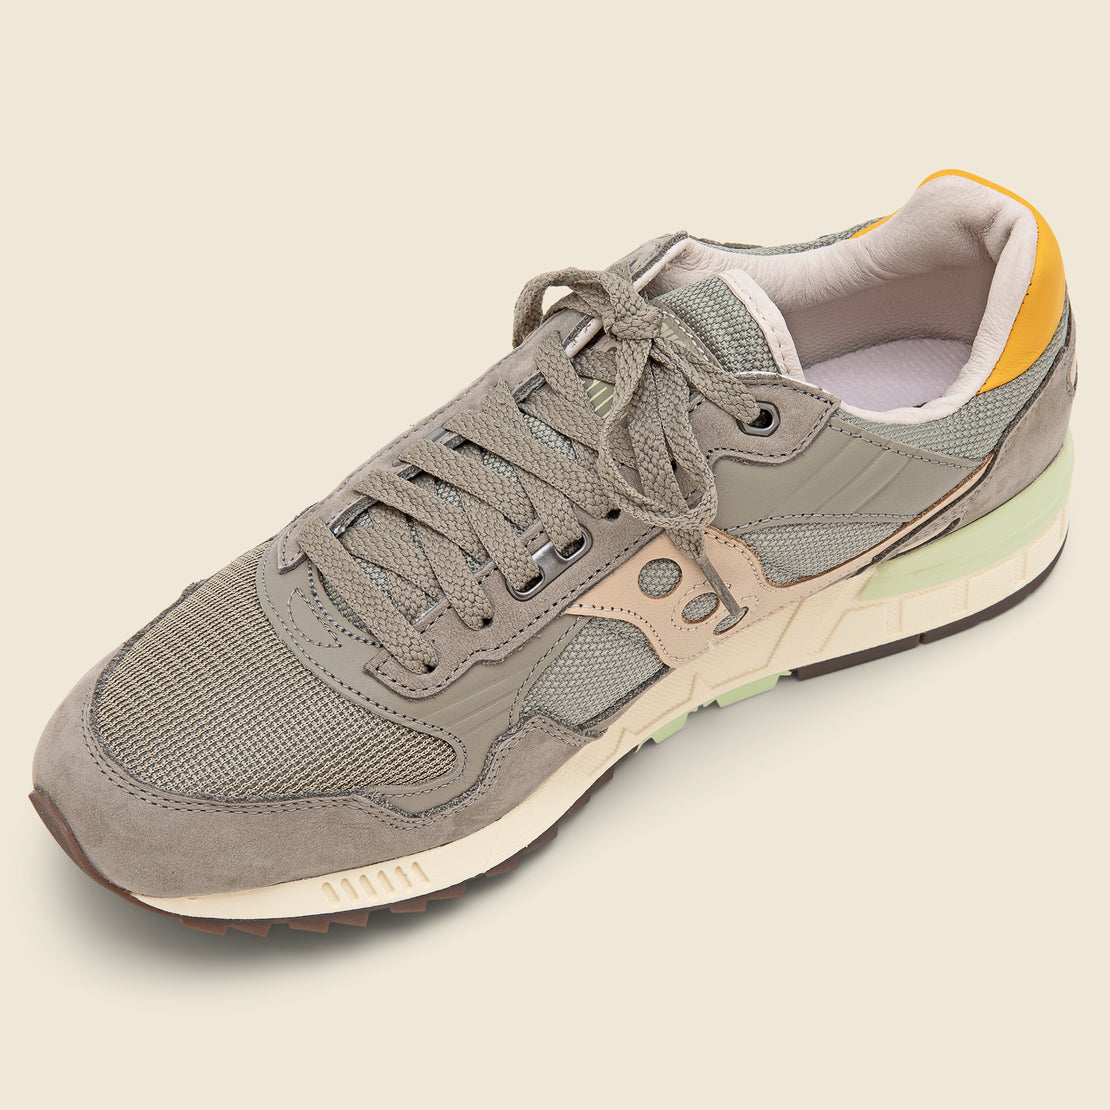 Shadow 5000 Sneaker - Grey/Taupe